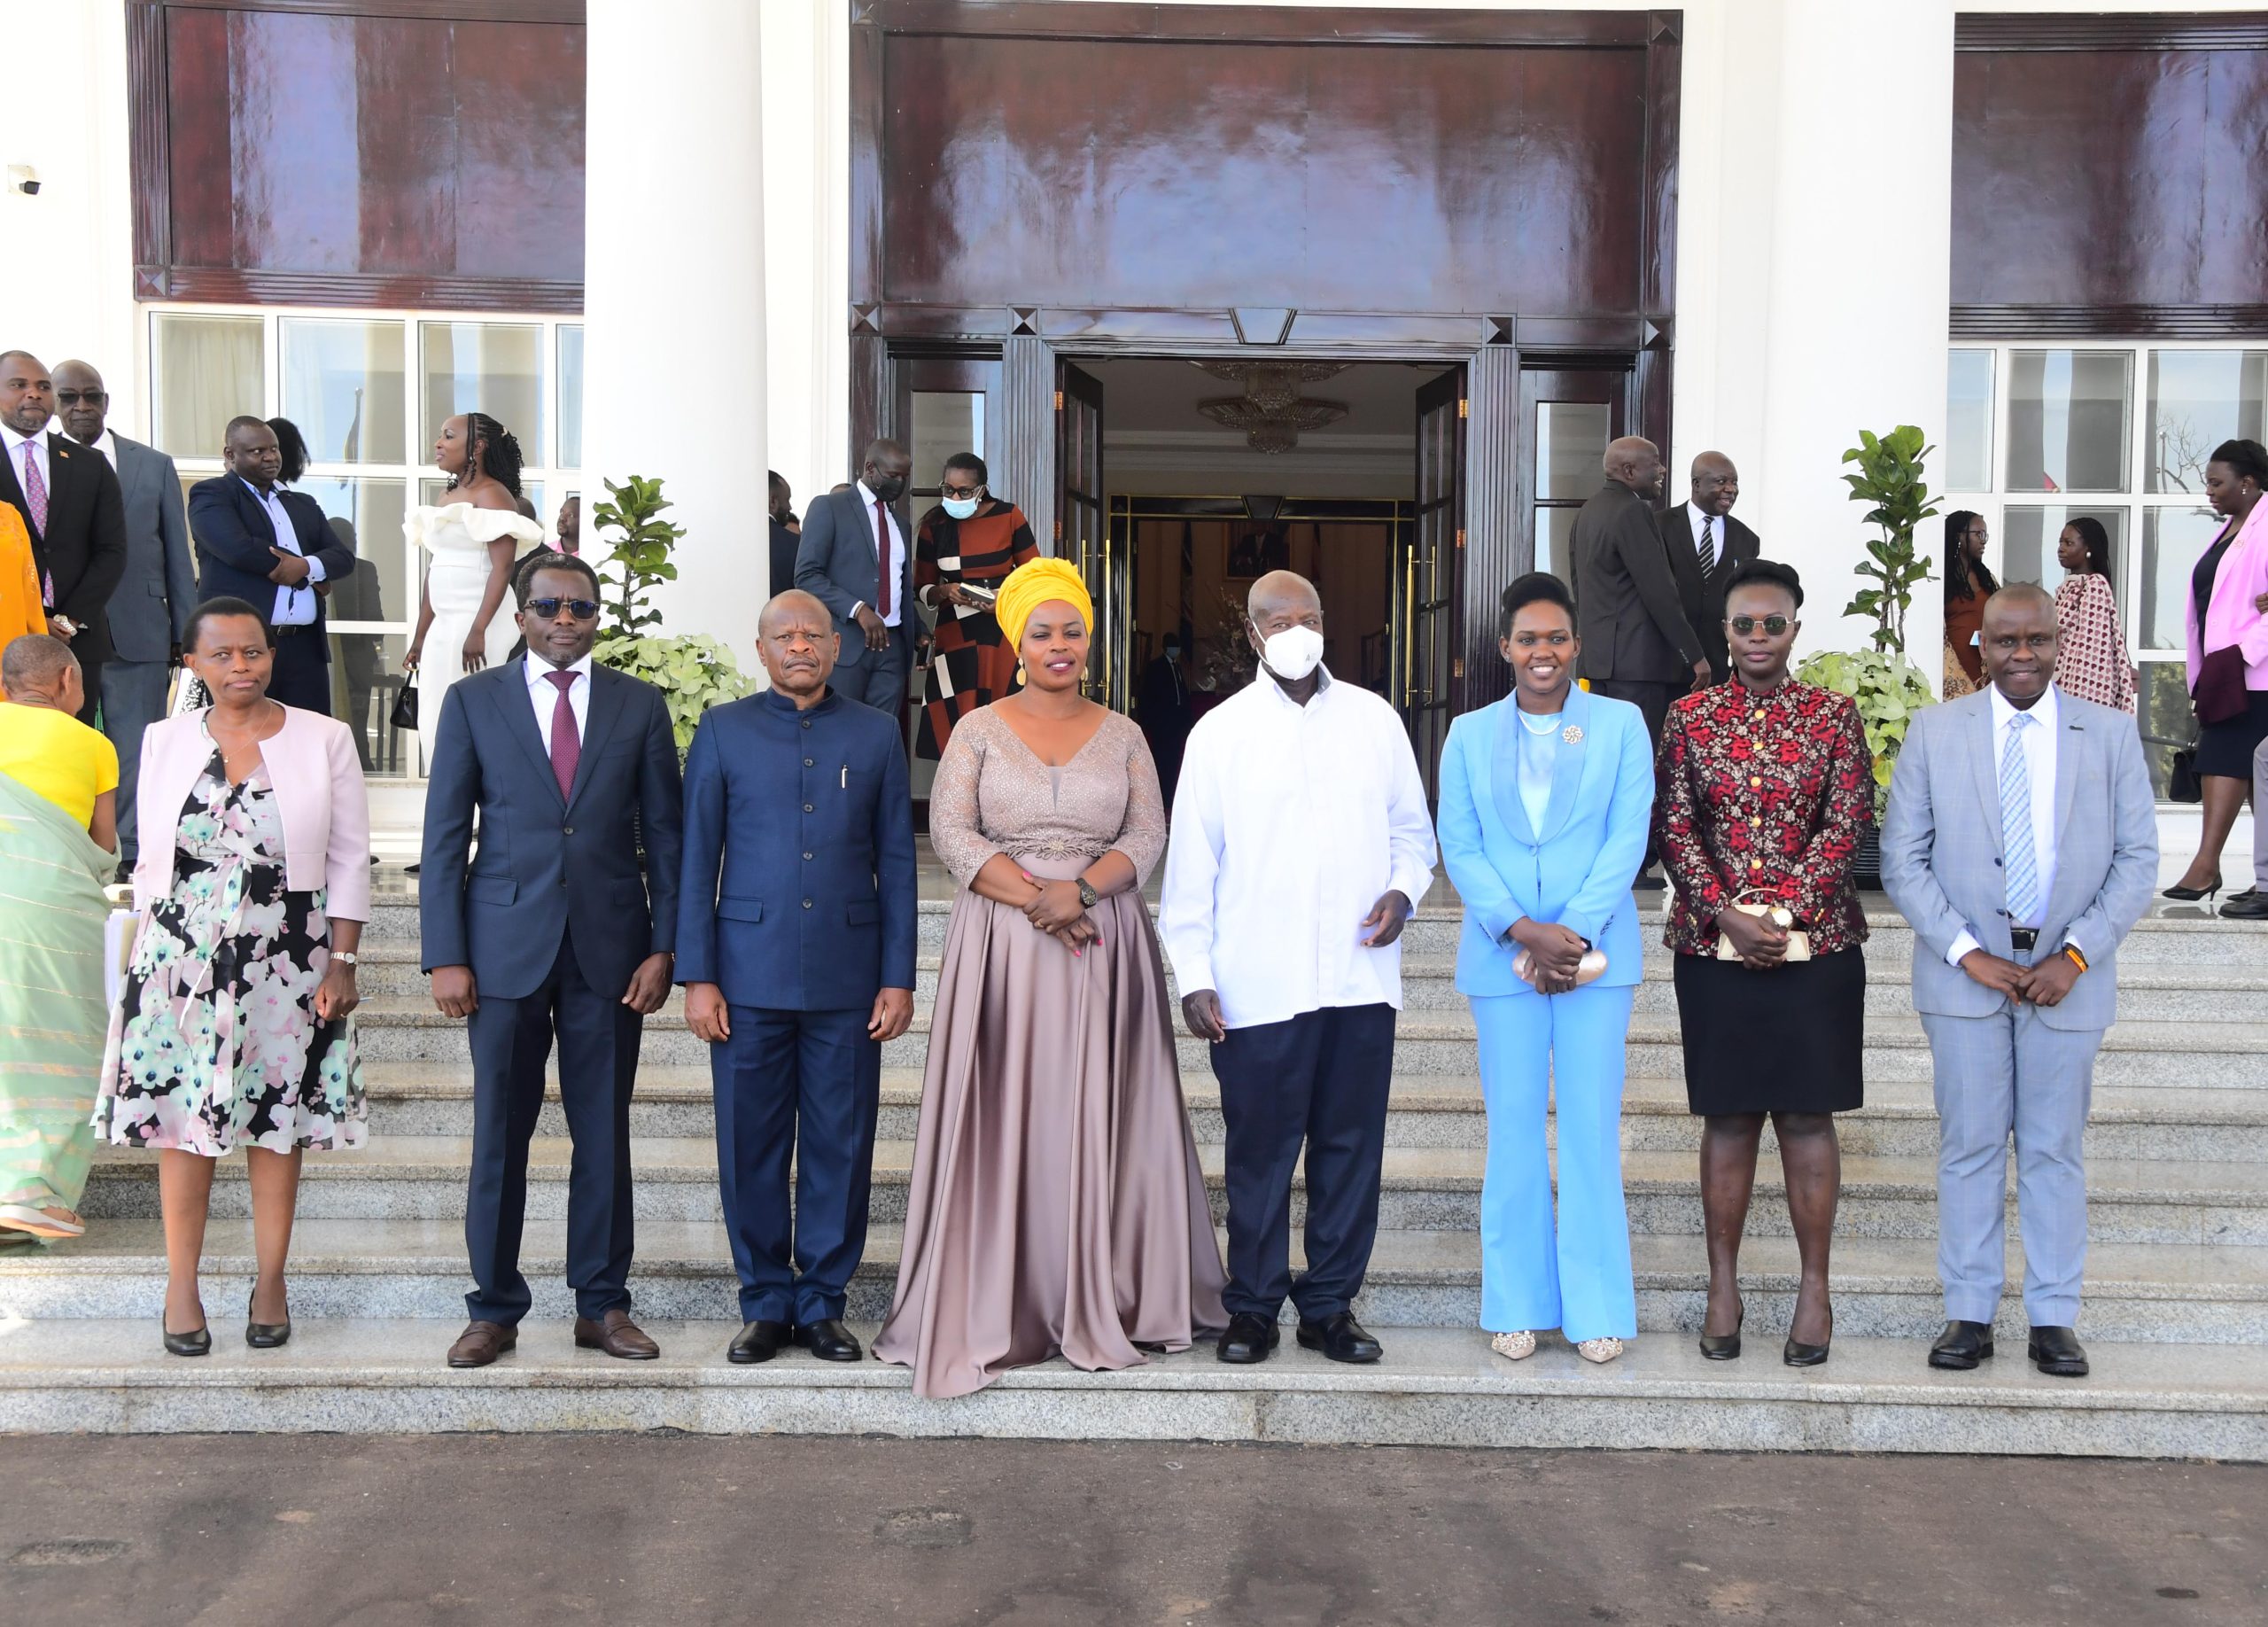 President Museveni Urges Newly Appointed Ministers to Prioritize Wealth Creation and Combat Corruption